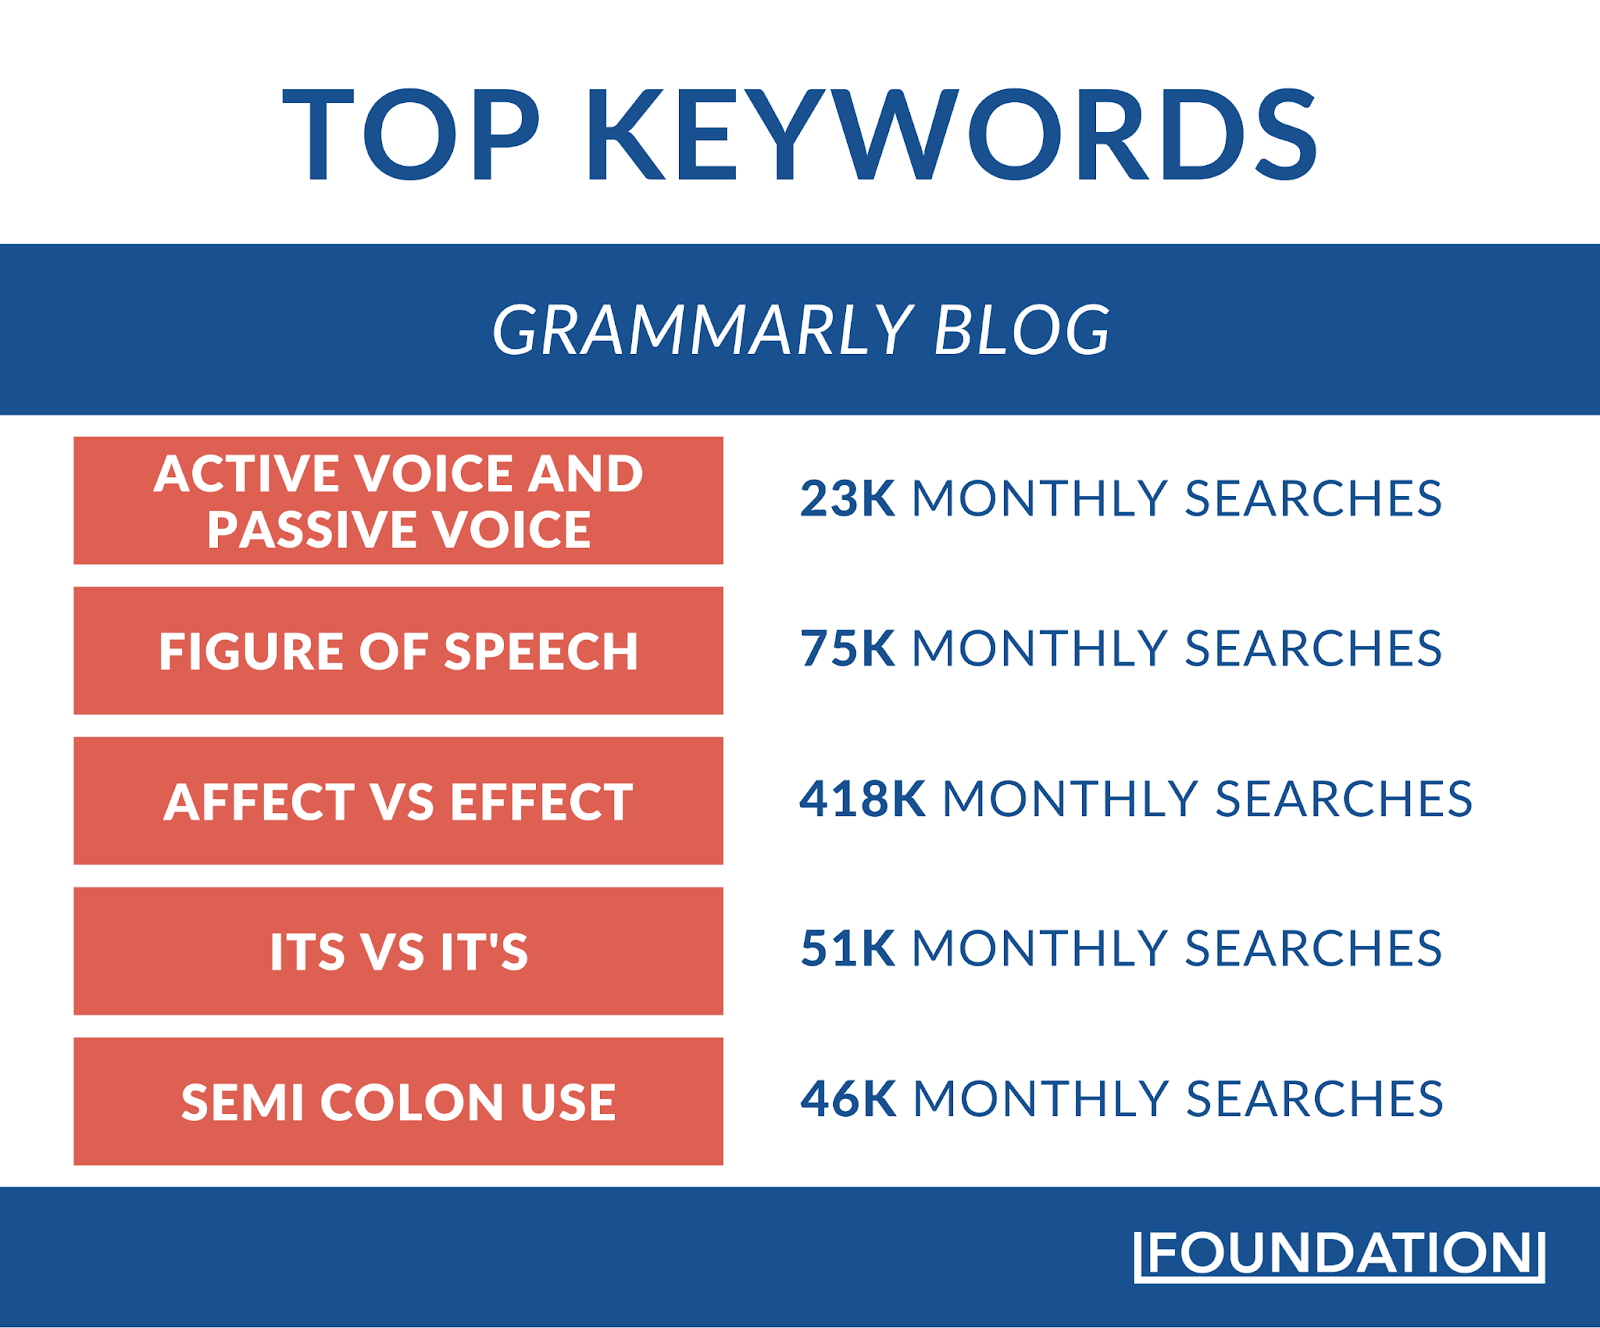 Top keywords for the Grammarly blog by monthly search volume